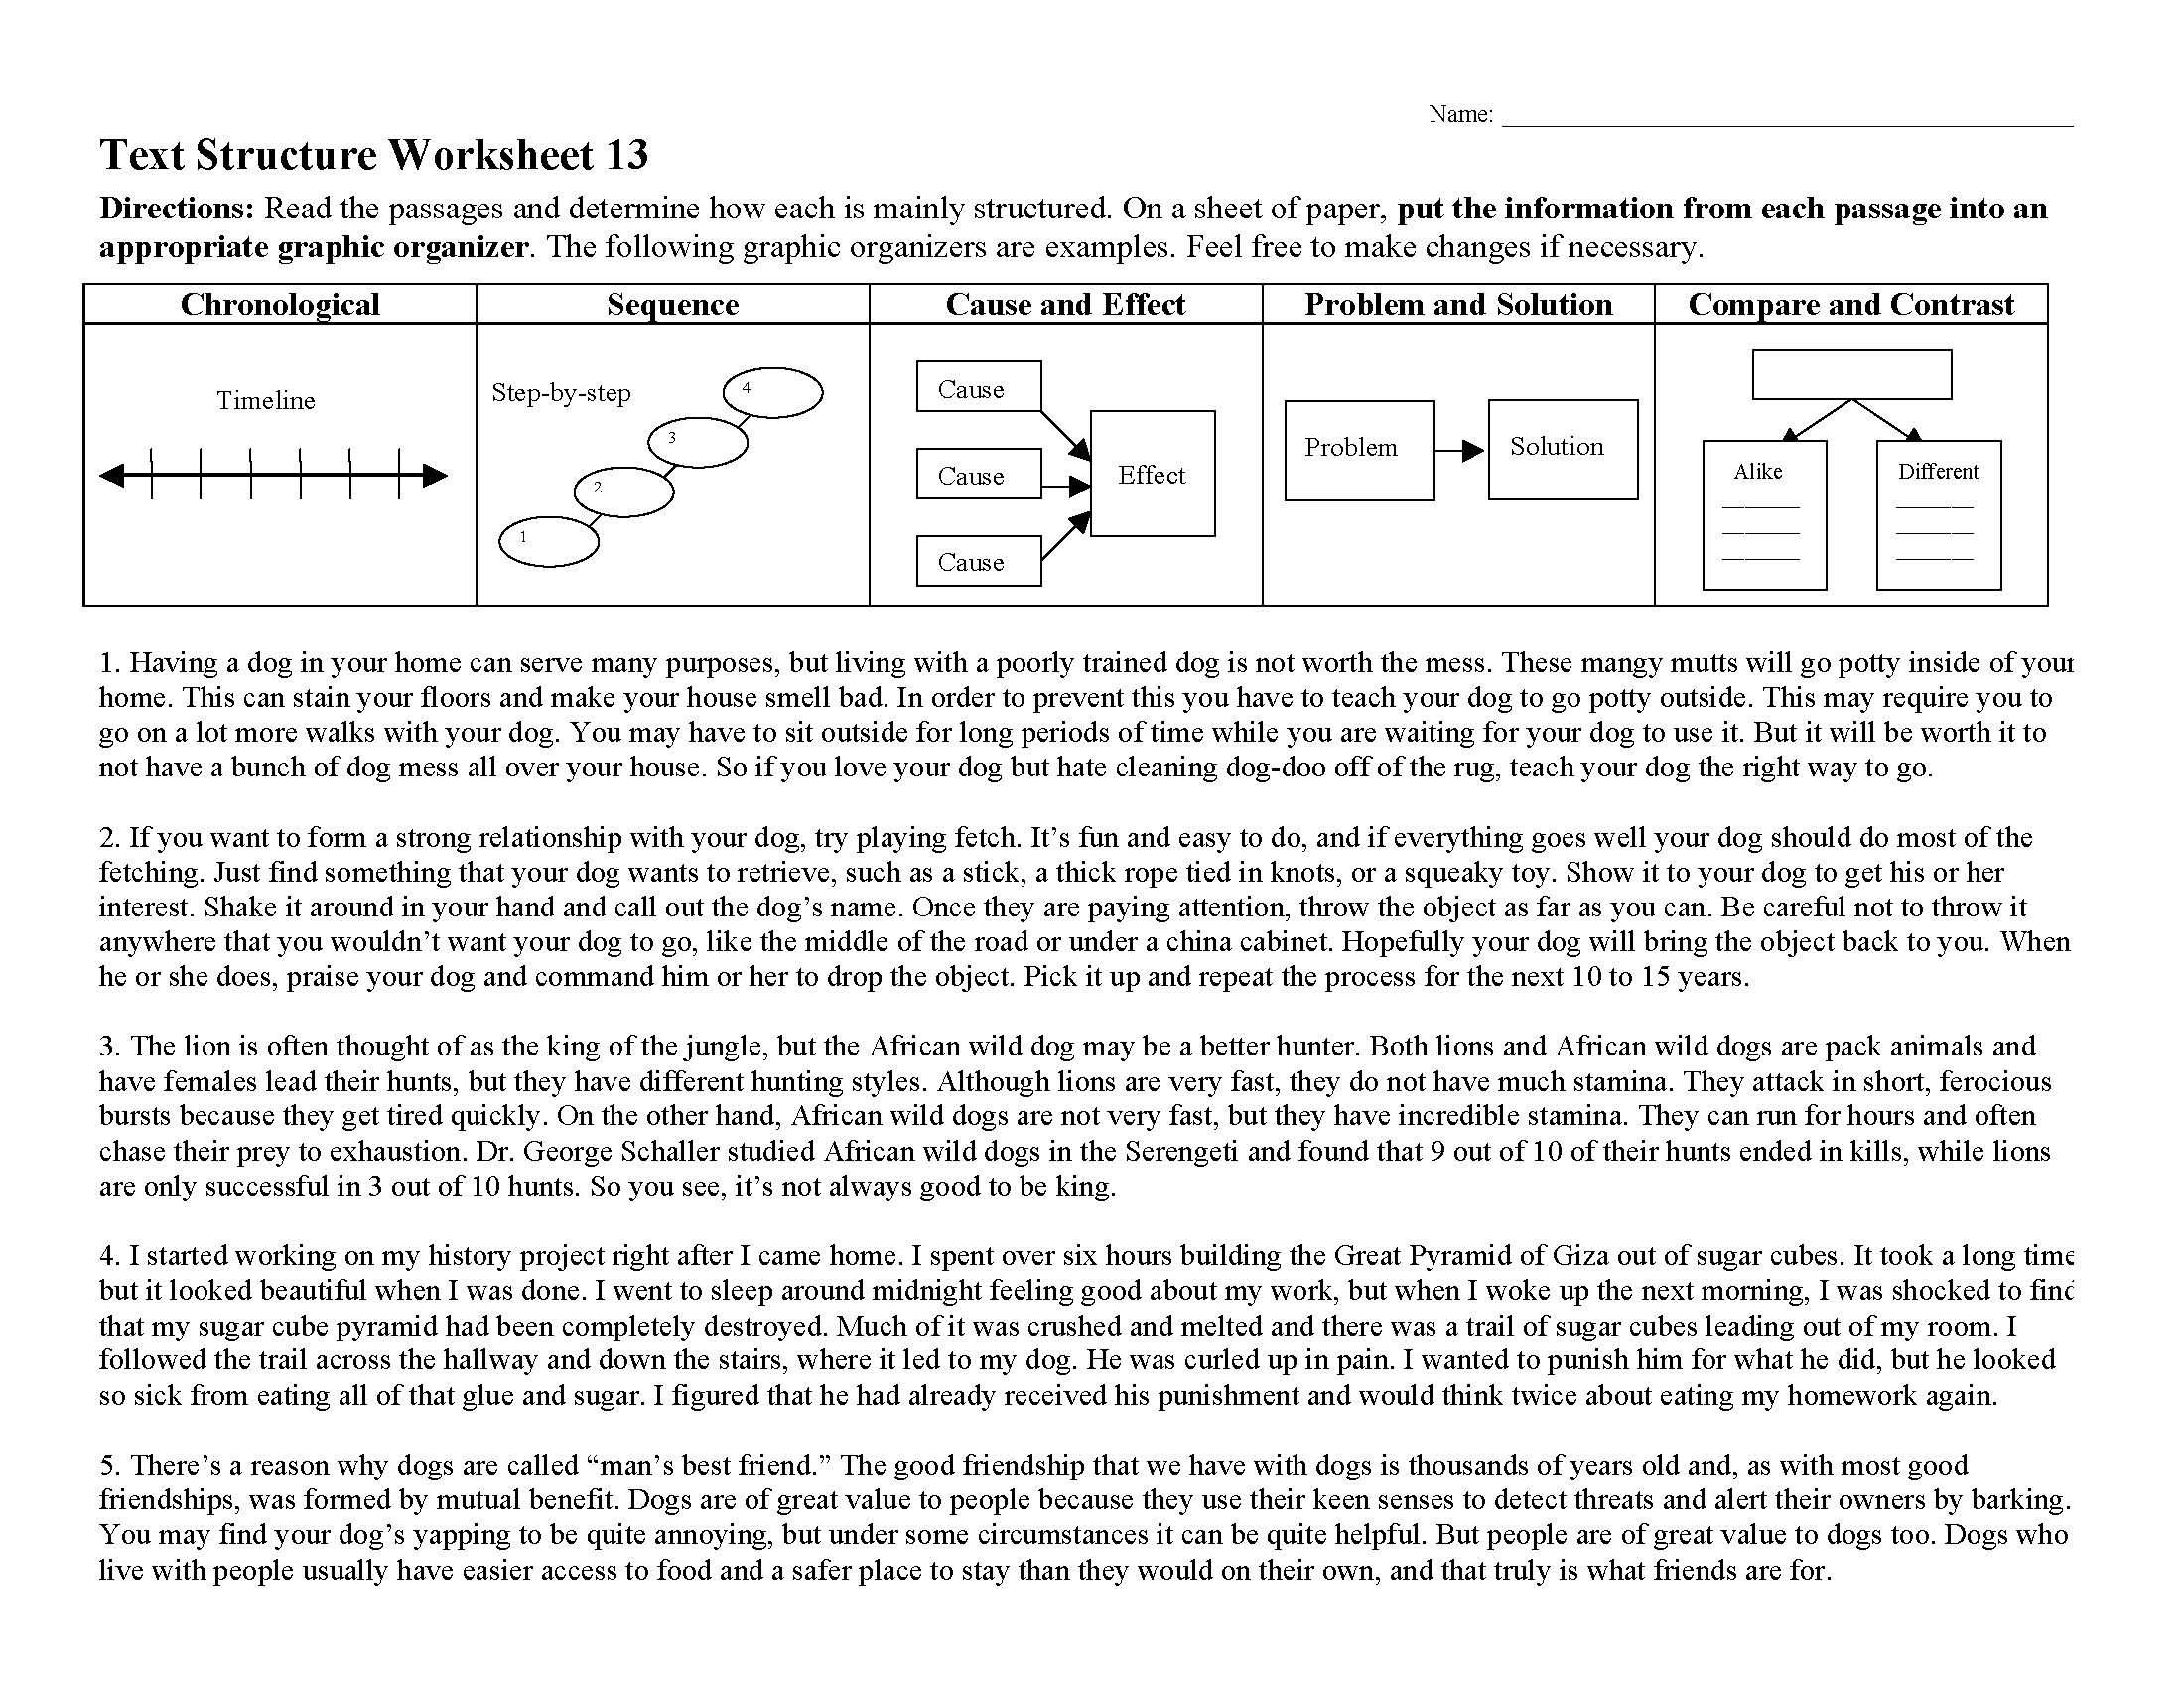 This is a preview image of the Text Structure Worksheet 13.